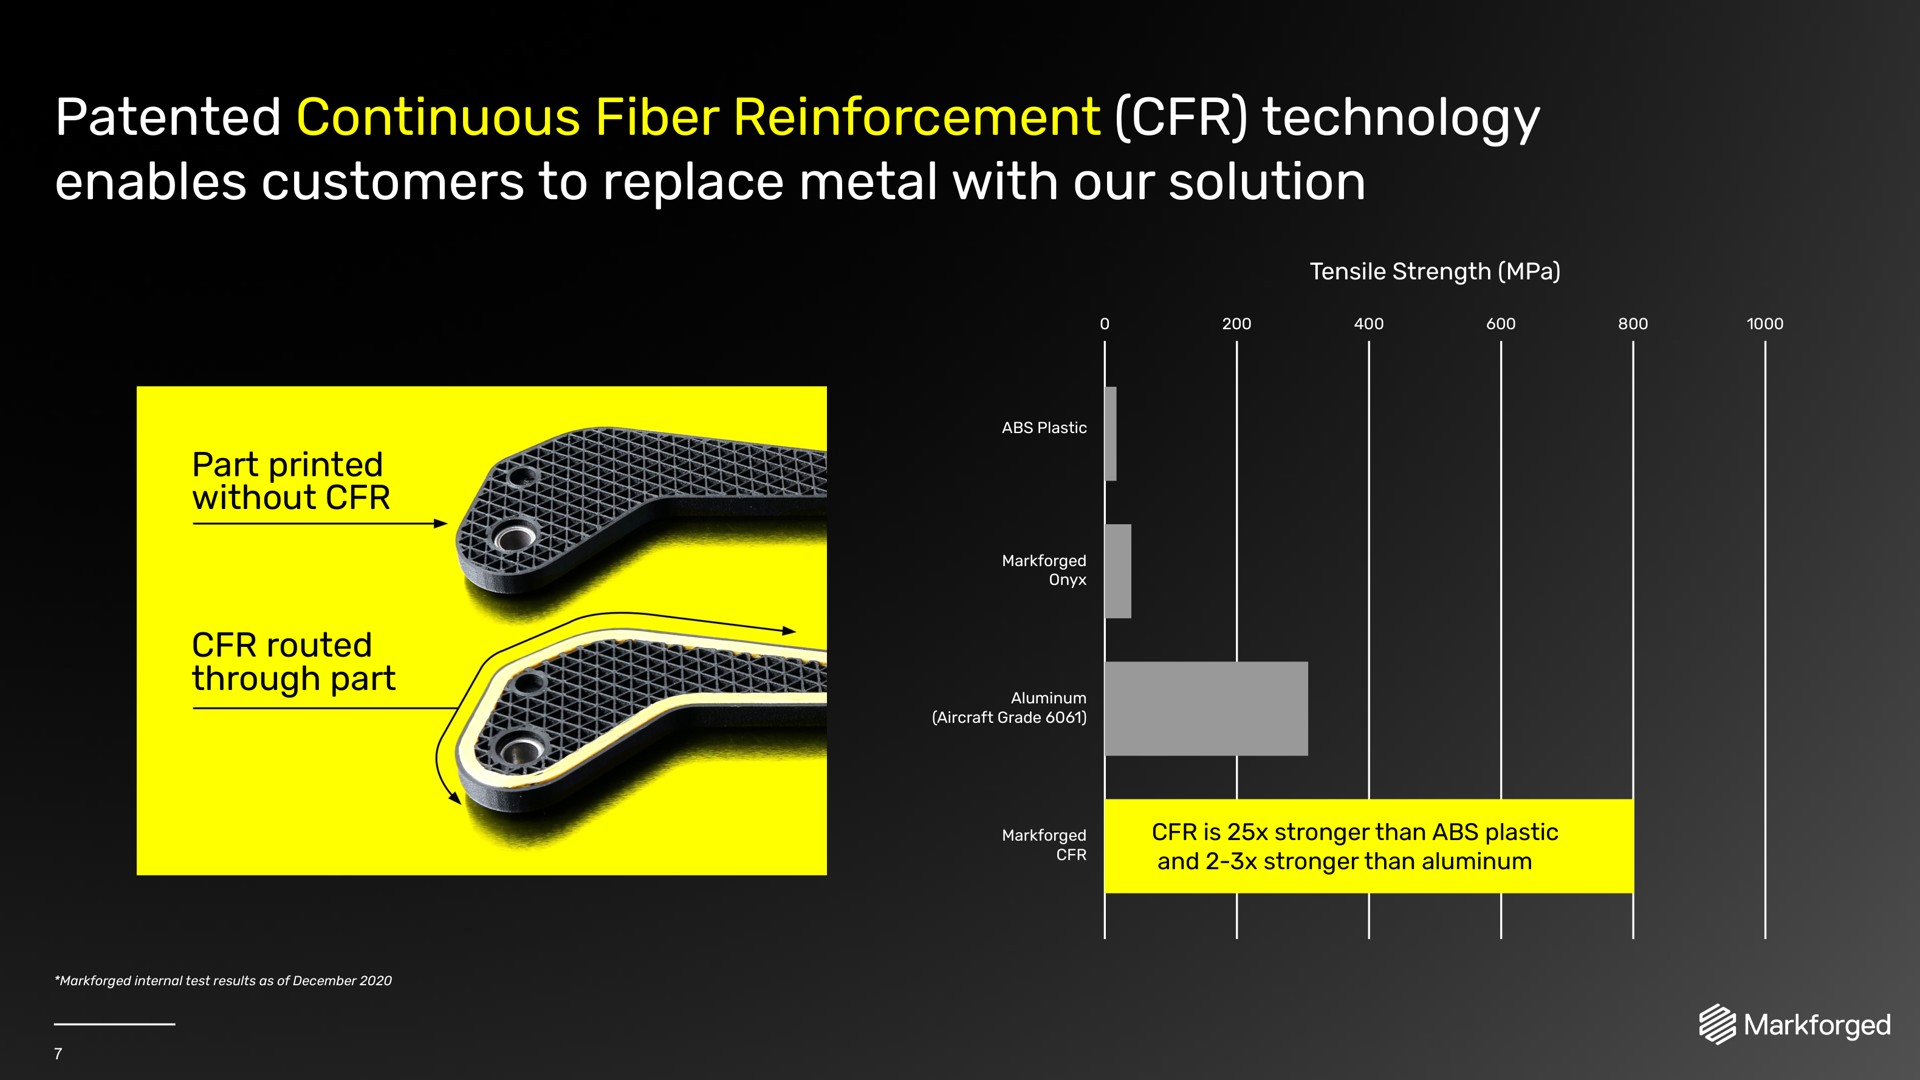 patented continuous fiber reinforcement technology enables customers to replace metal with our solution | Markforged